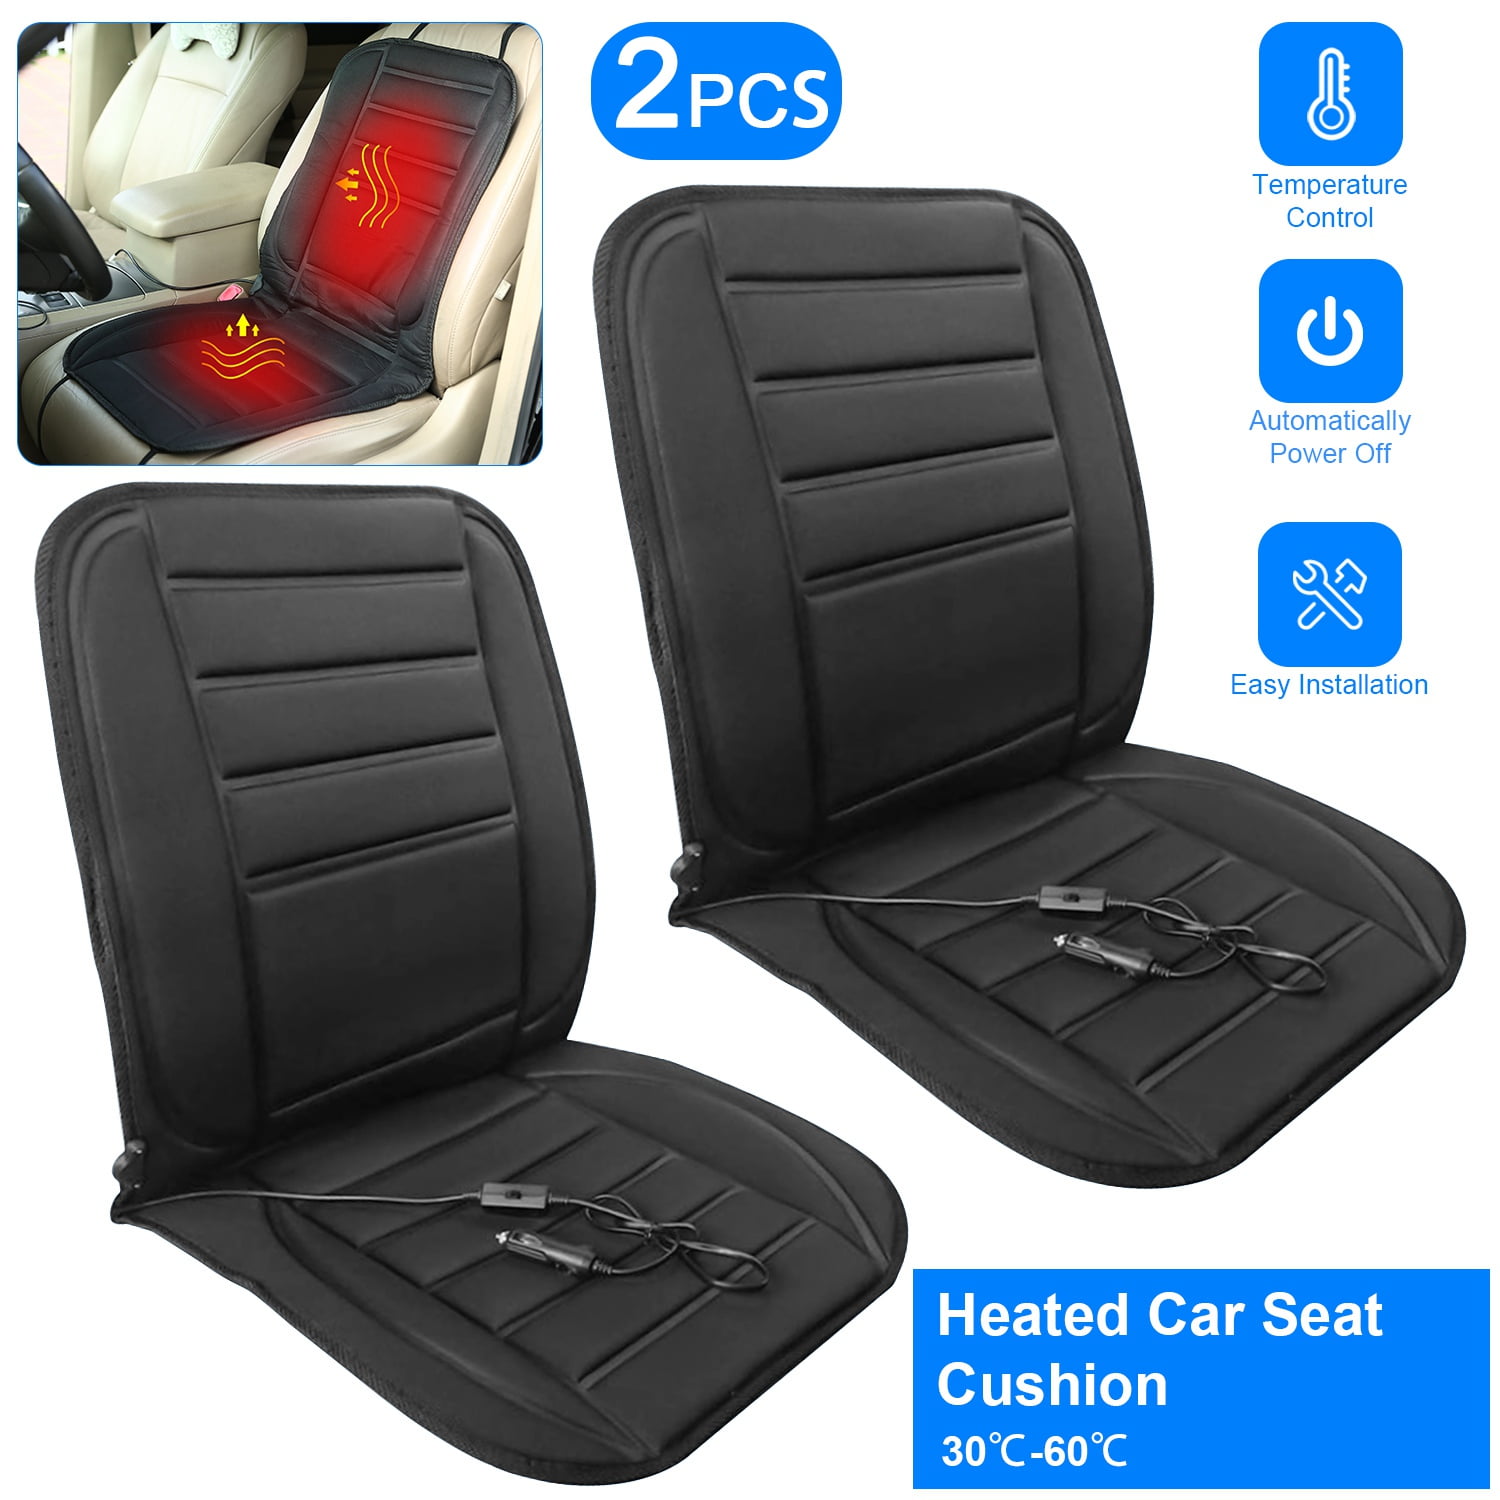 Heated Car Seat Cushion 12V Auto Seat Cover Warmer with Adjustable